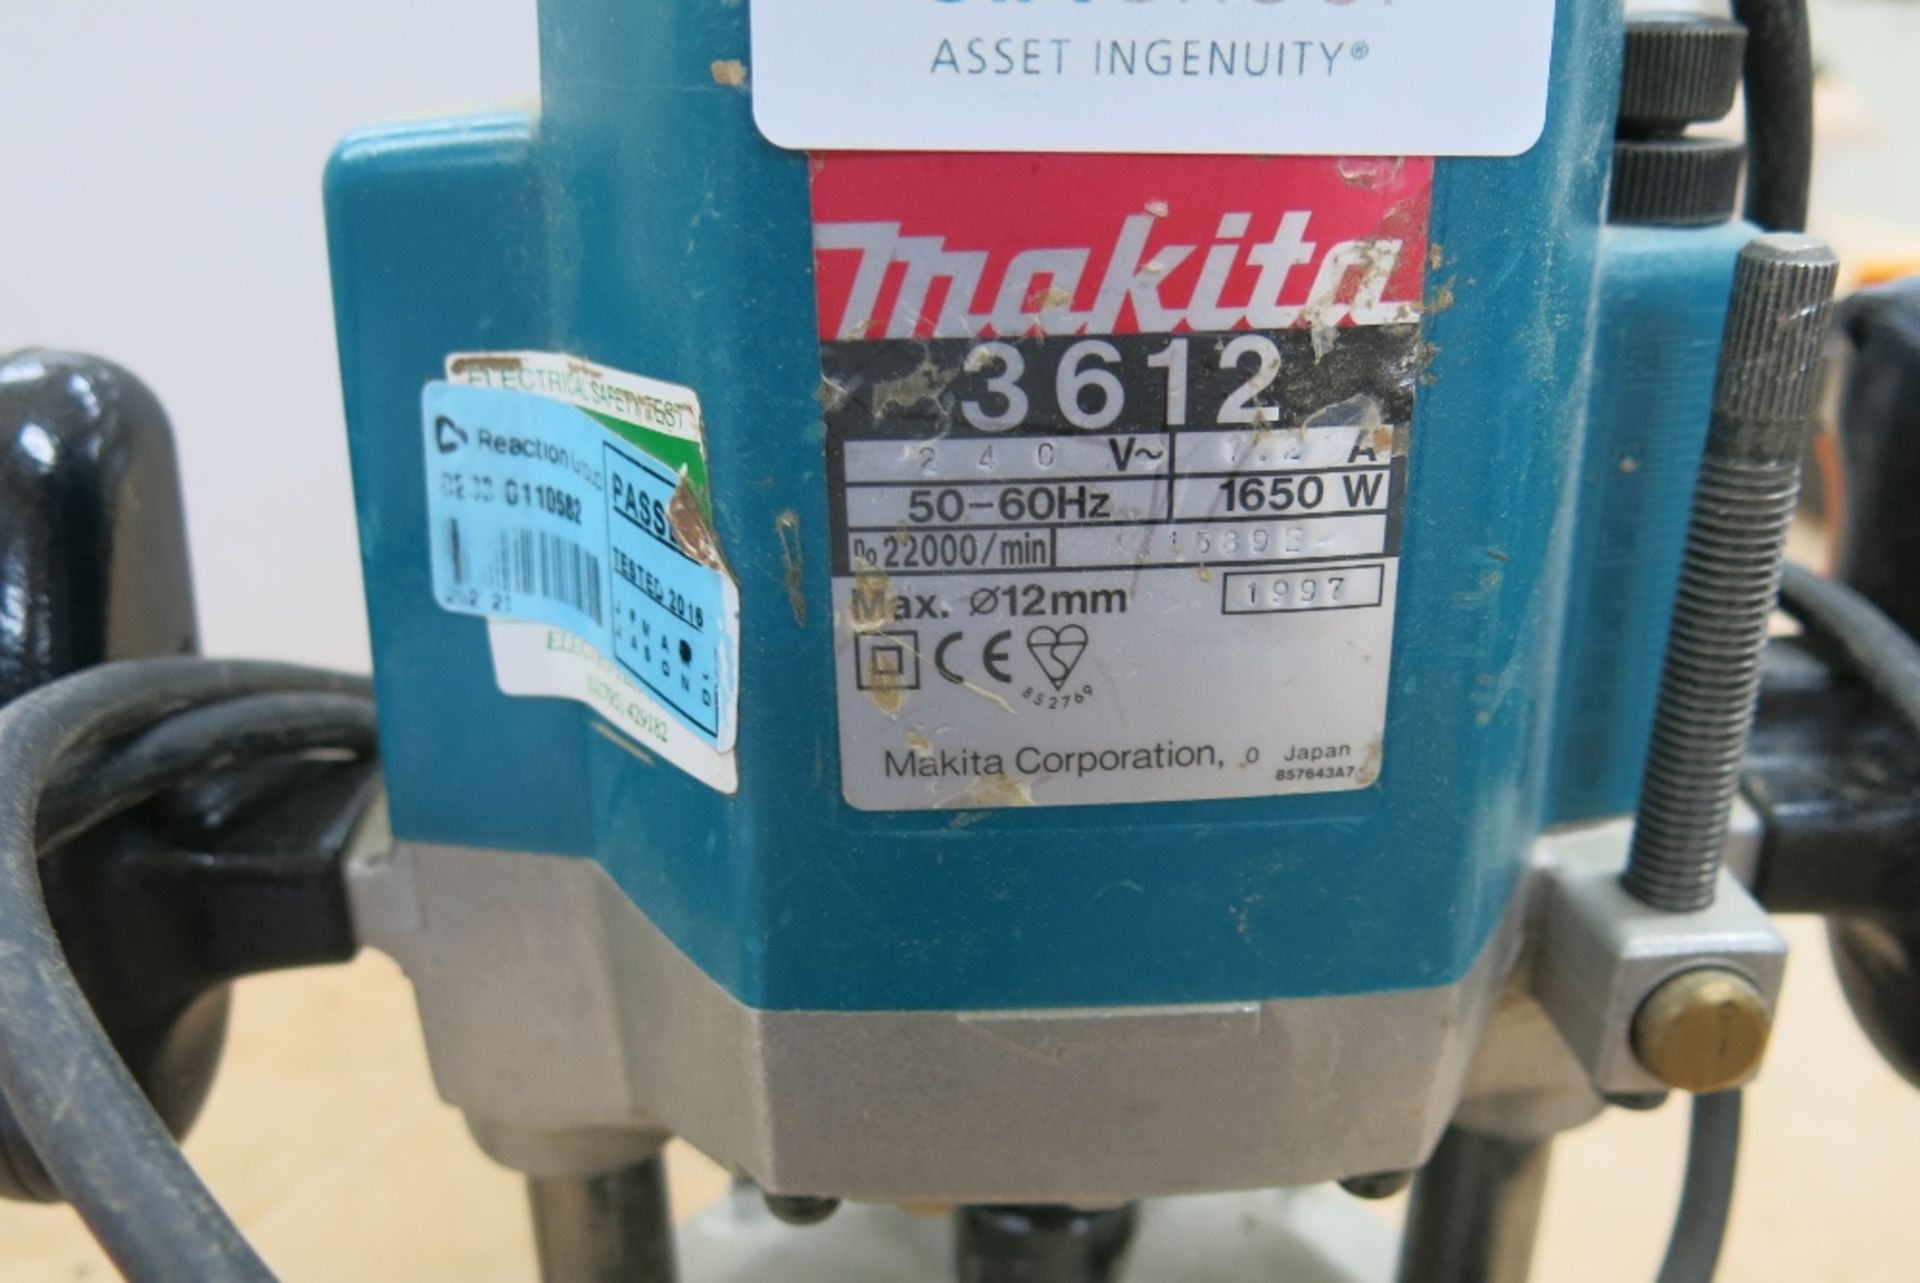 Makita 3612 plunge router - Image 2 of 2